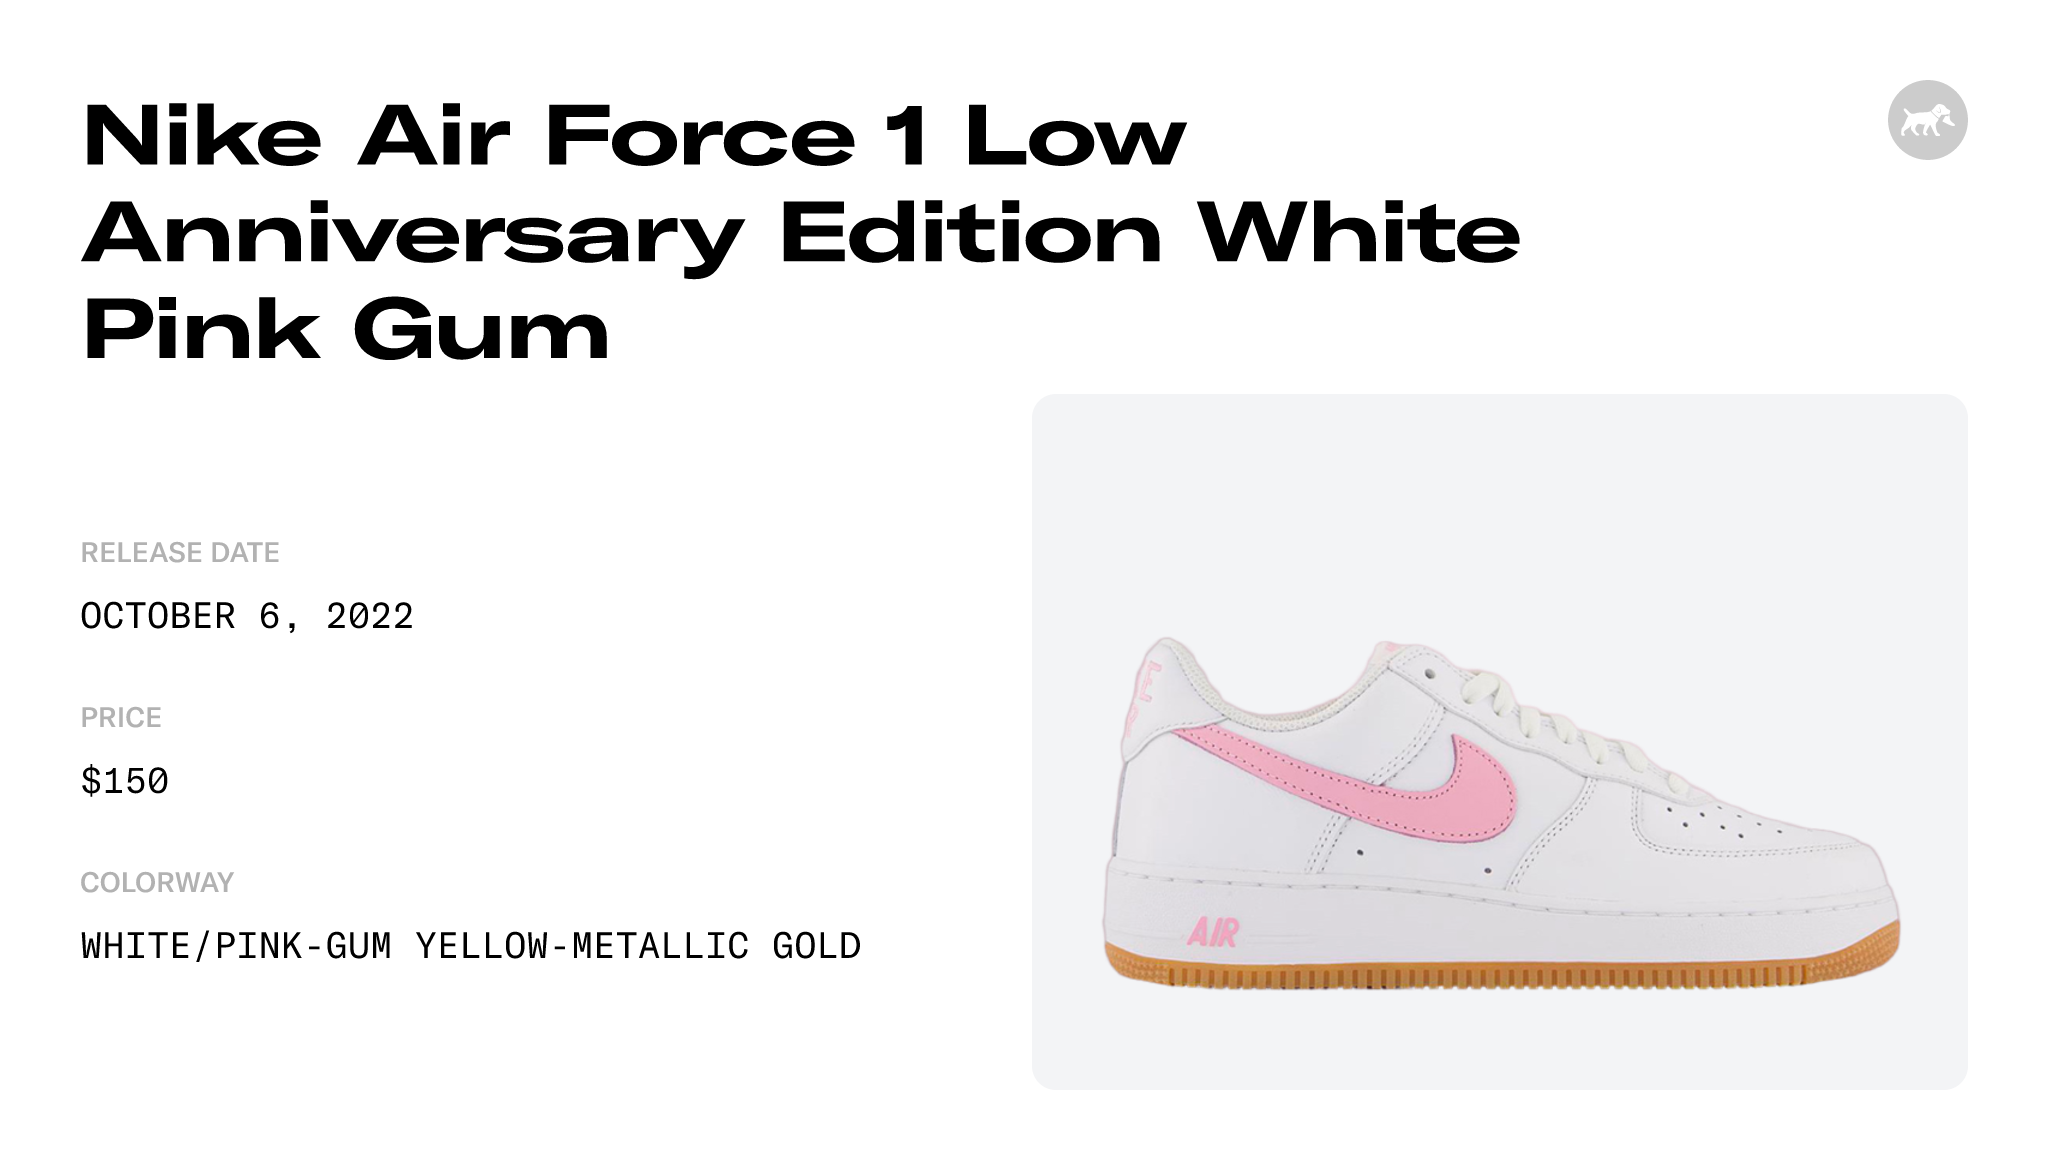 Nike Air Force 1 Low Since 82 Pink Gum